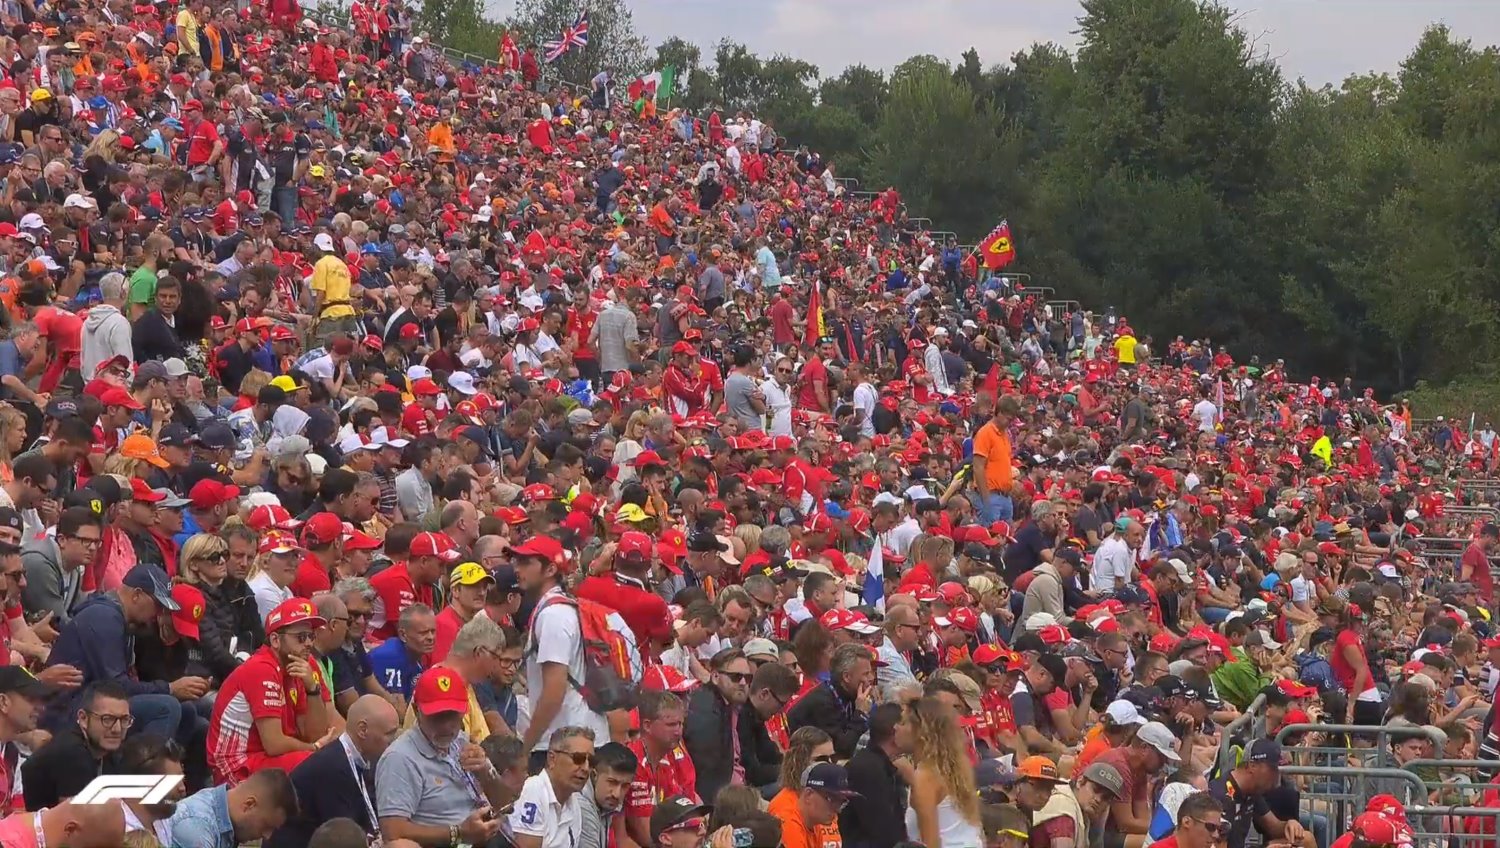 Monza crowds are huge